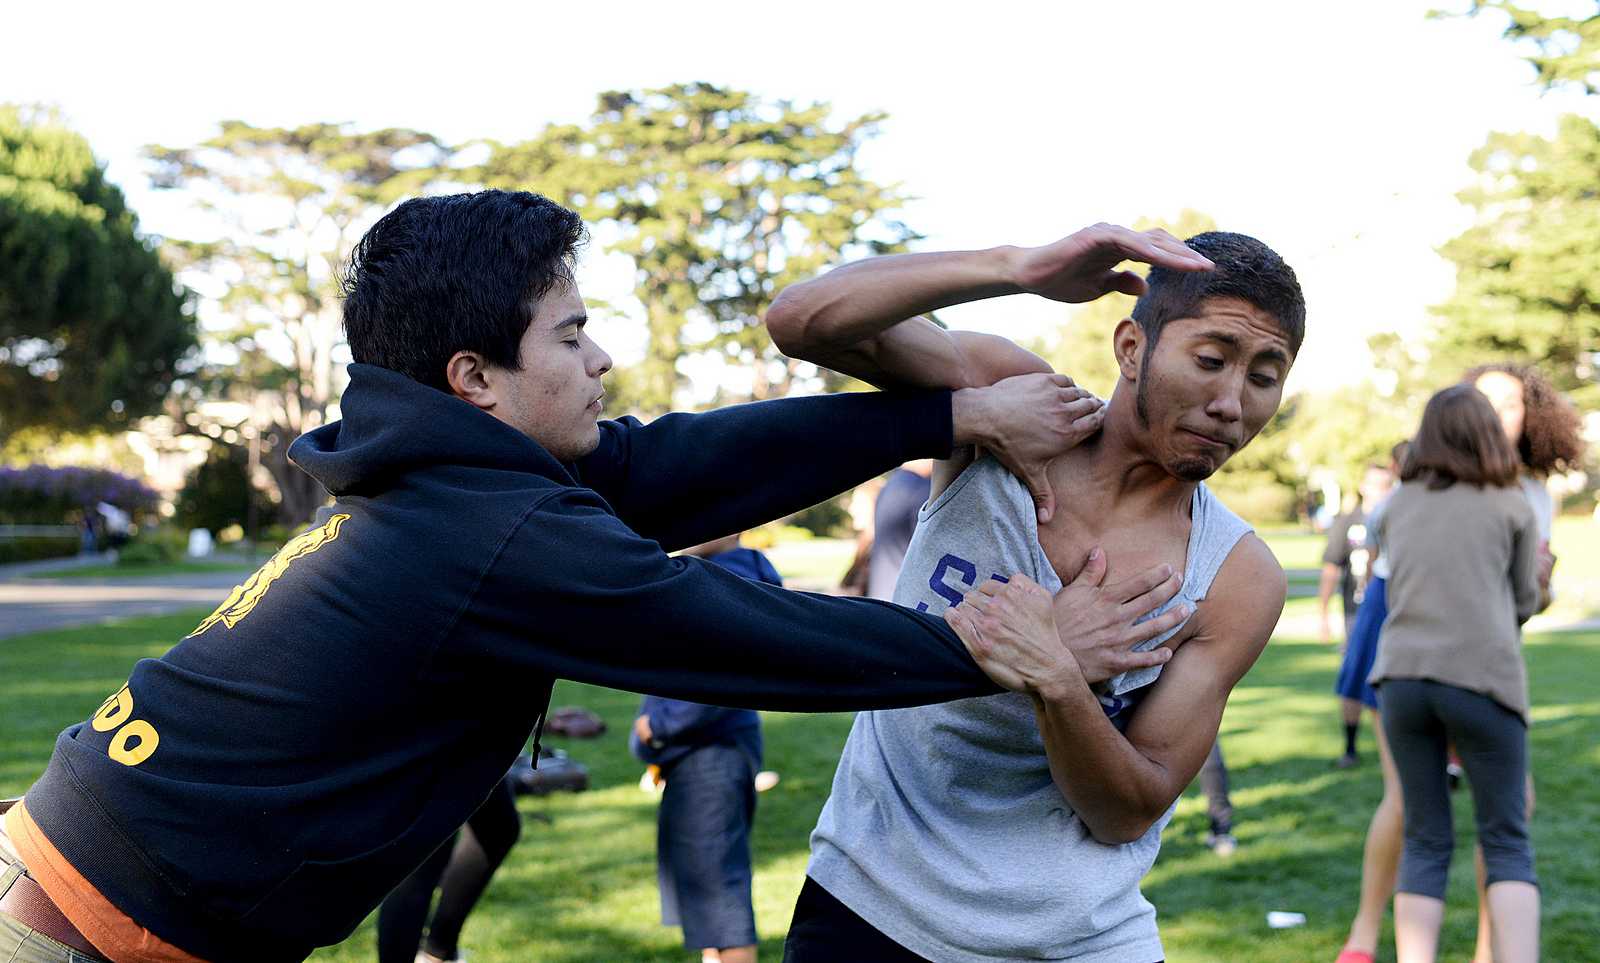 Oscar Hernandez (left) practices Krav Maga moves with Micky Mejia (right) during a Women's Center sponsered event where self defense was taught to participants in the Quad at SF State on Thursday, Nov. 7, 2013. Photo by Virginia Tieman / Xpress